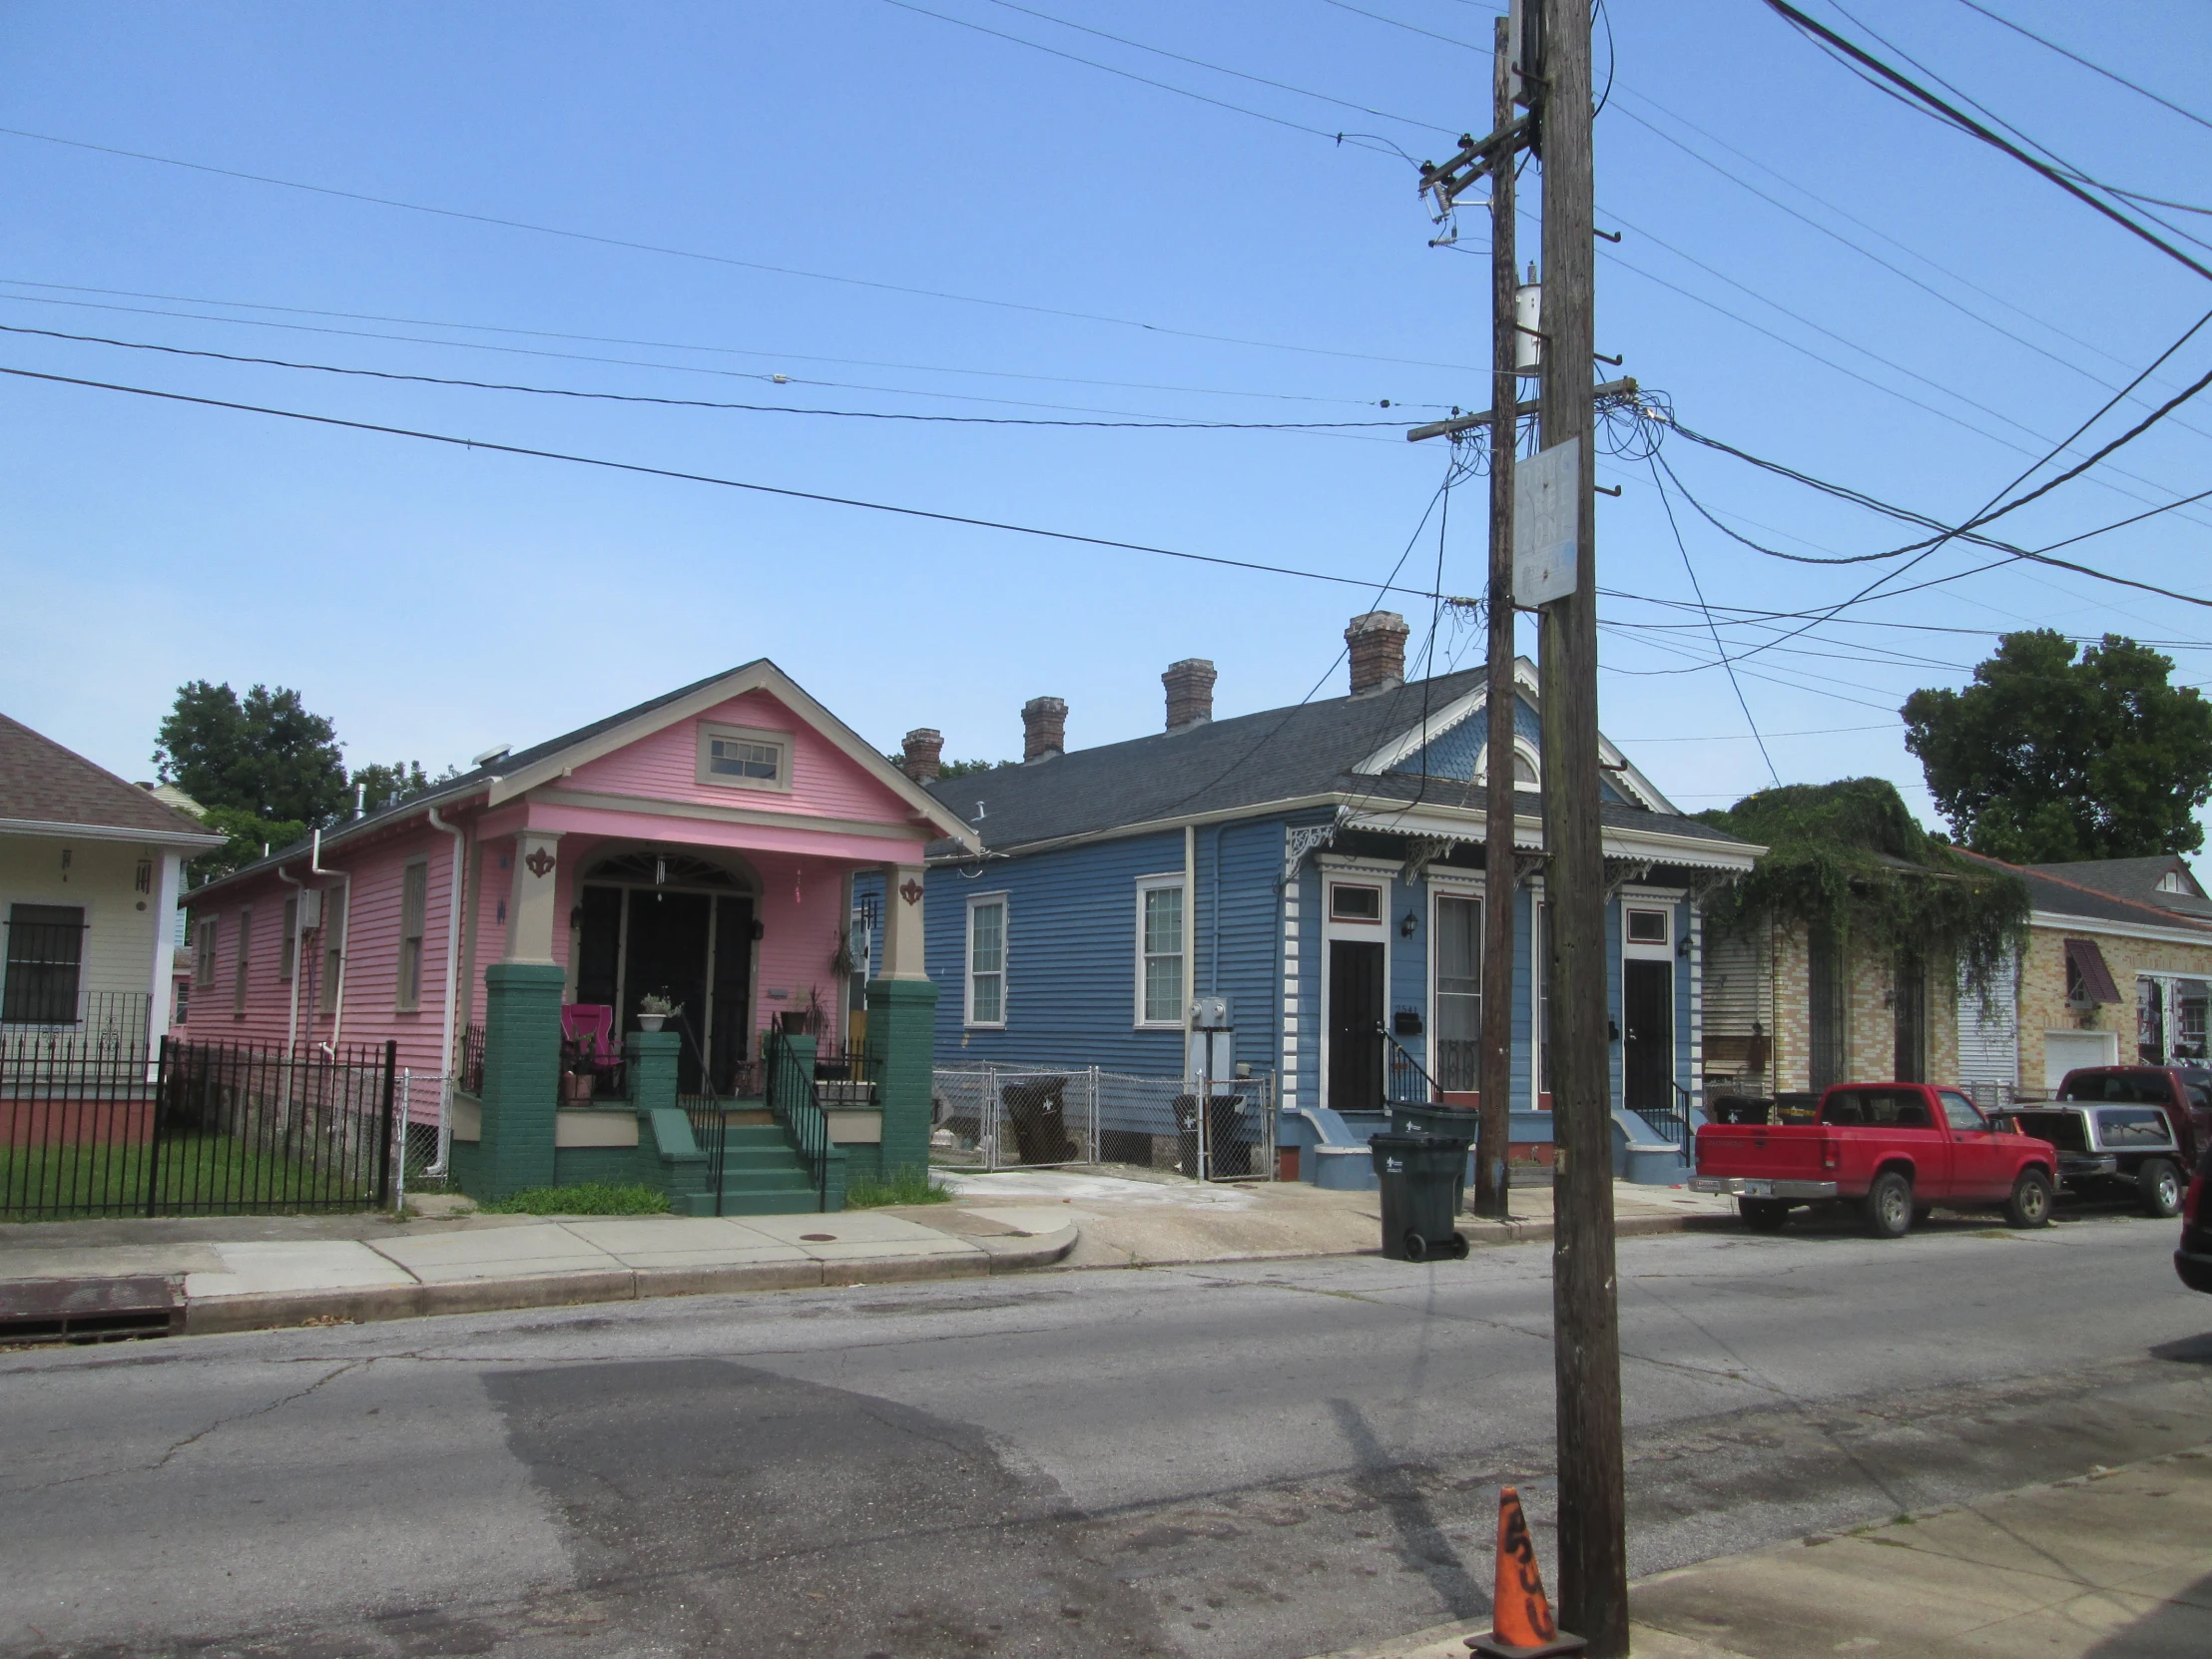 a street view of two colorful houses next to each other